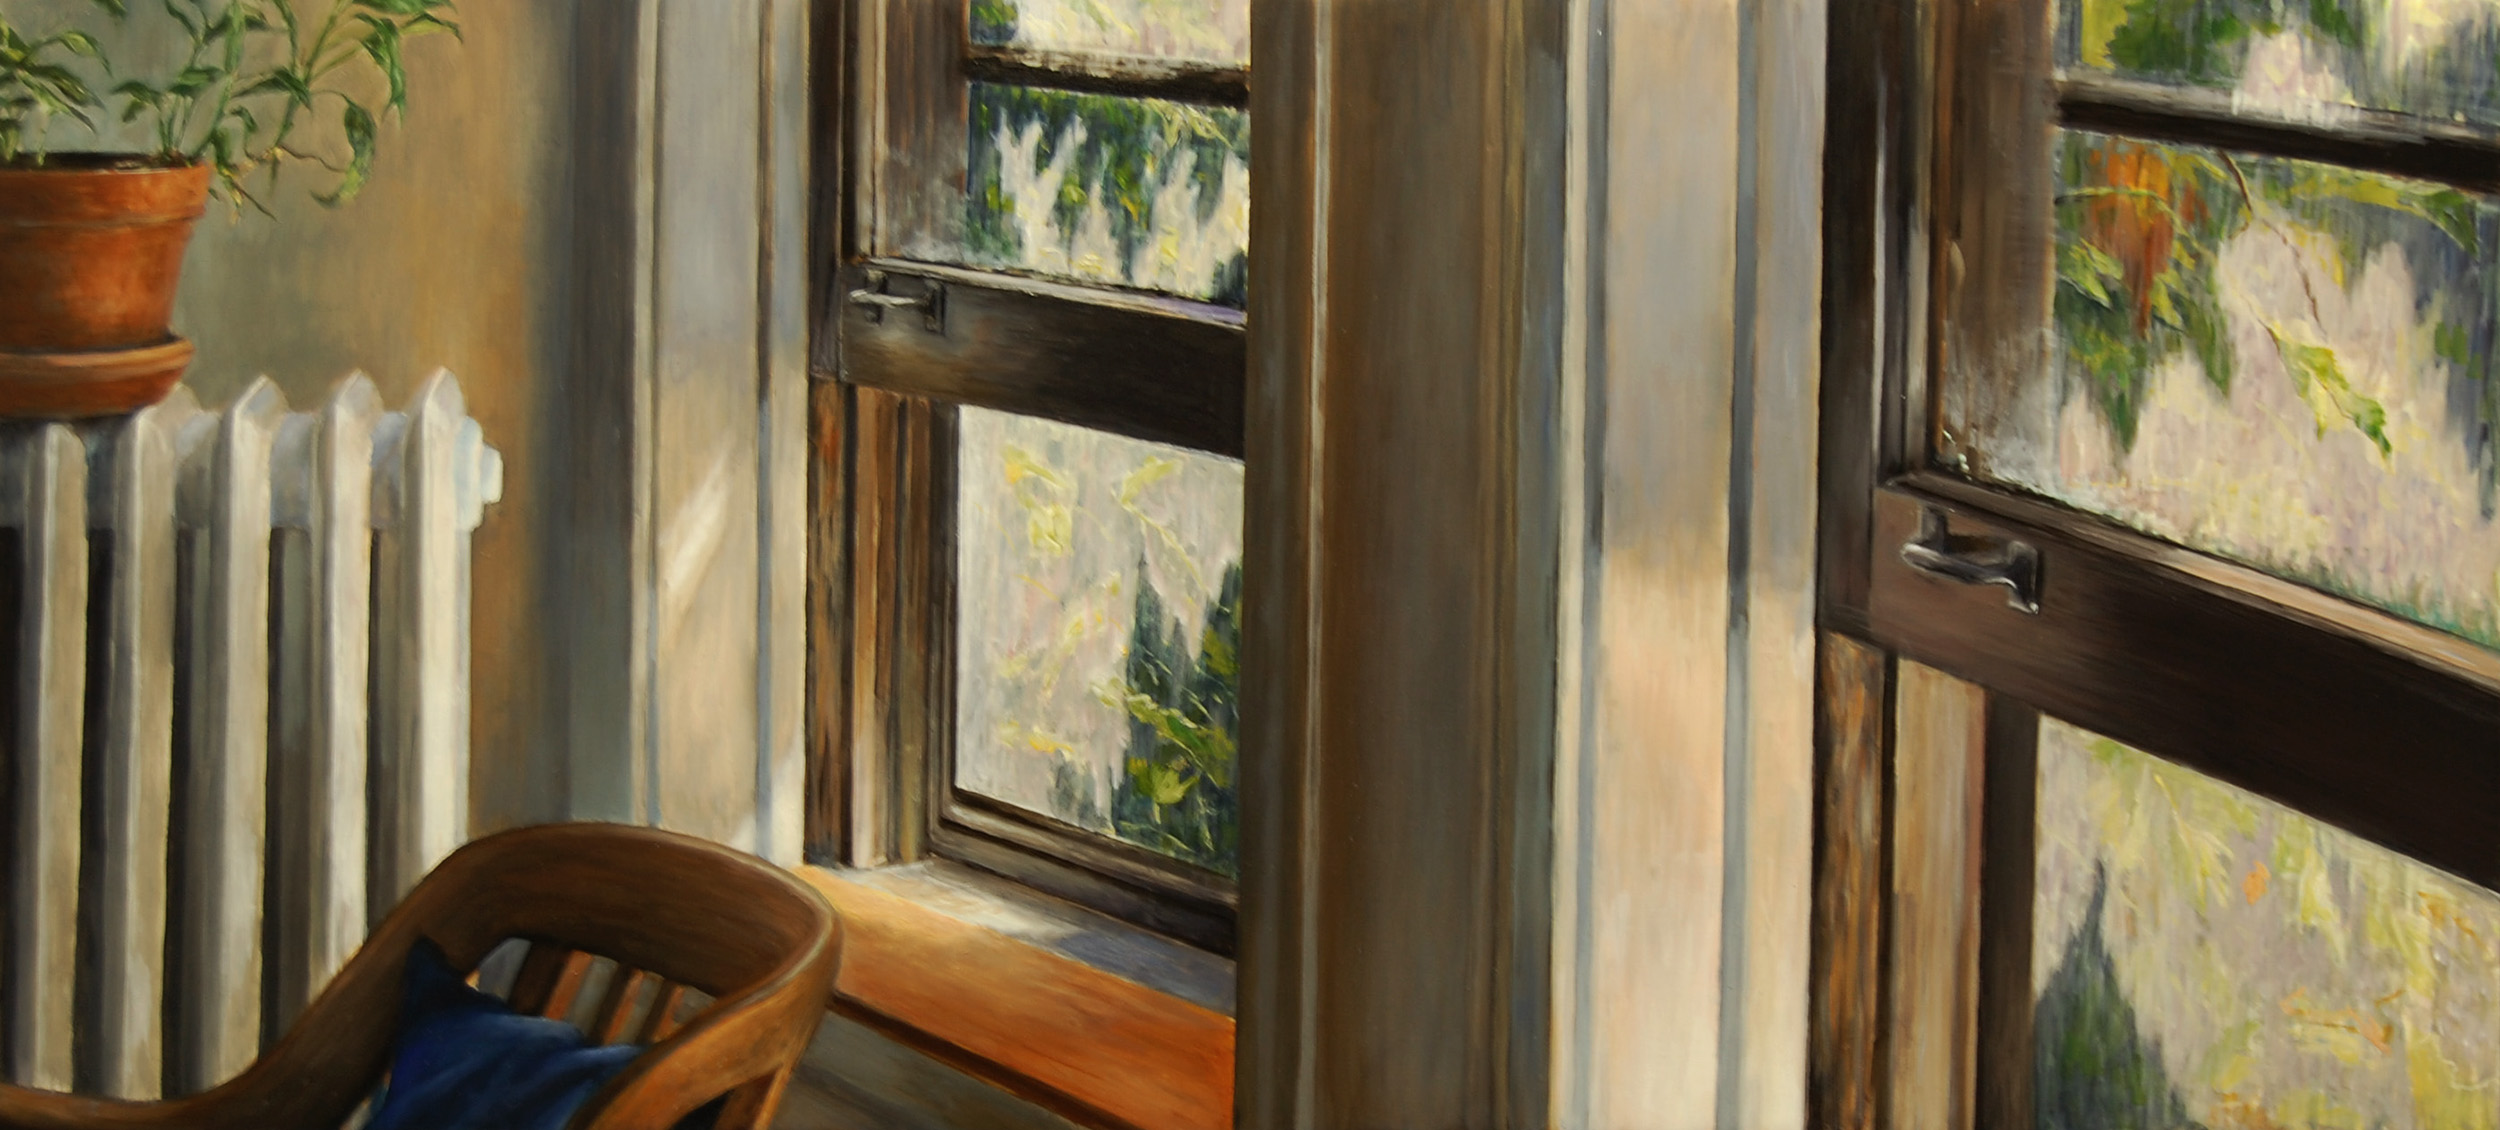   Early Afternoon Light   2011  Oil on canvas  15 x 32 inches       